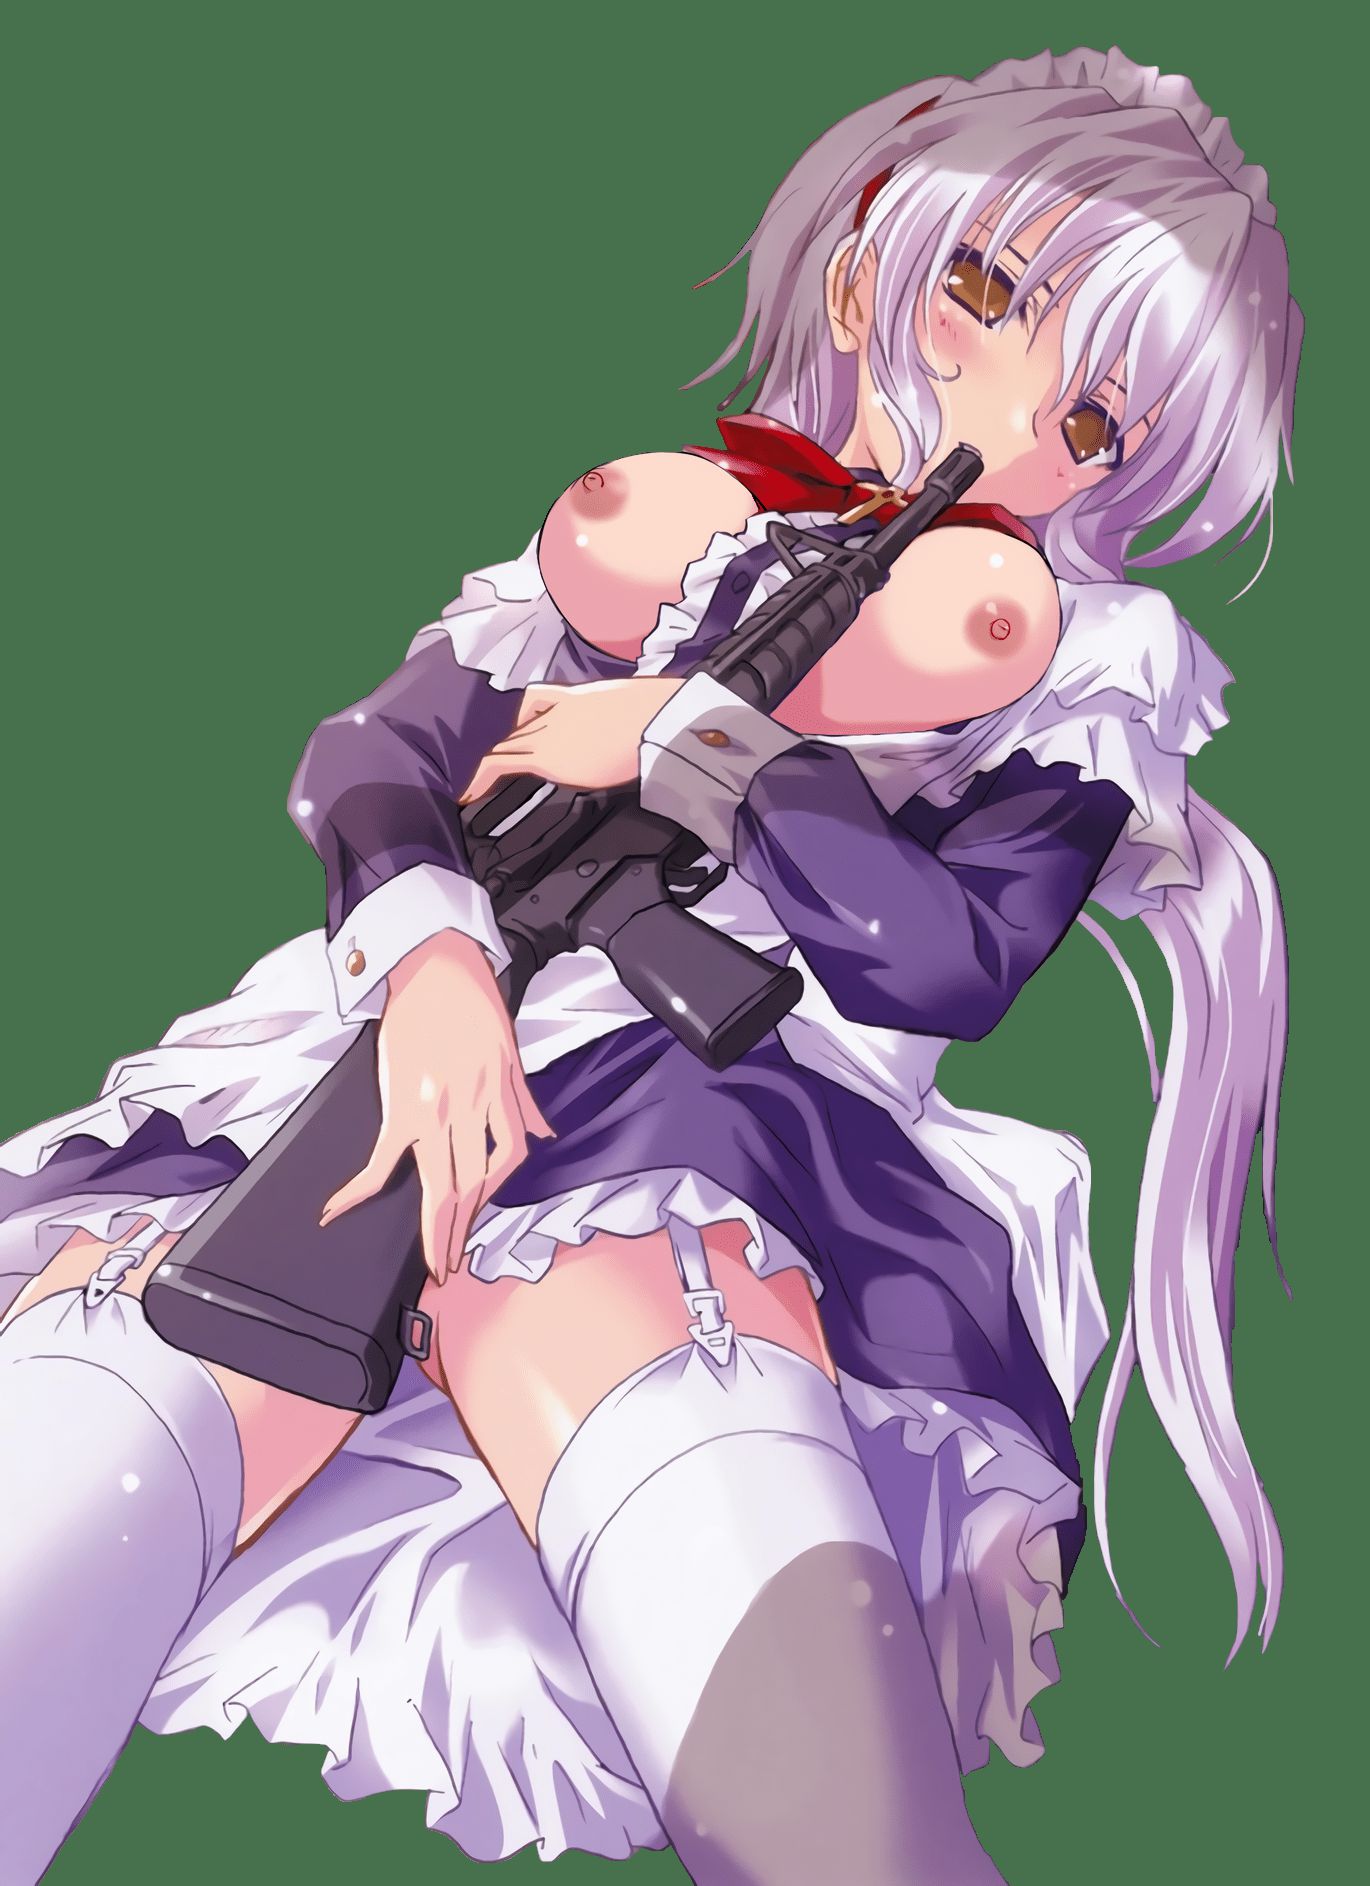 [Anime character material] png background of animated characters erotic images part 160 1